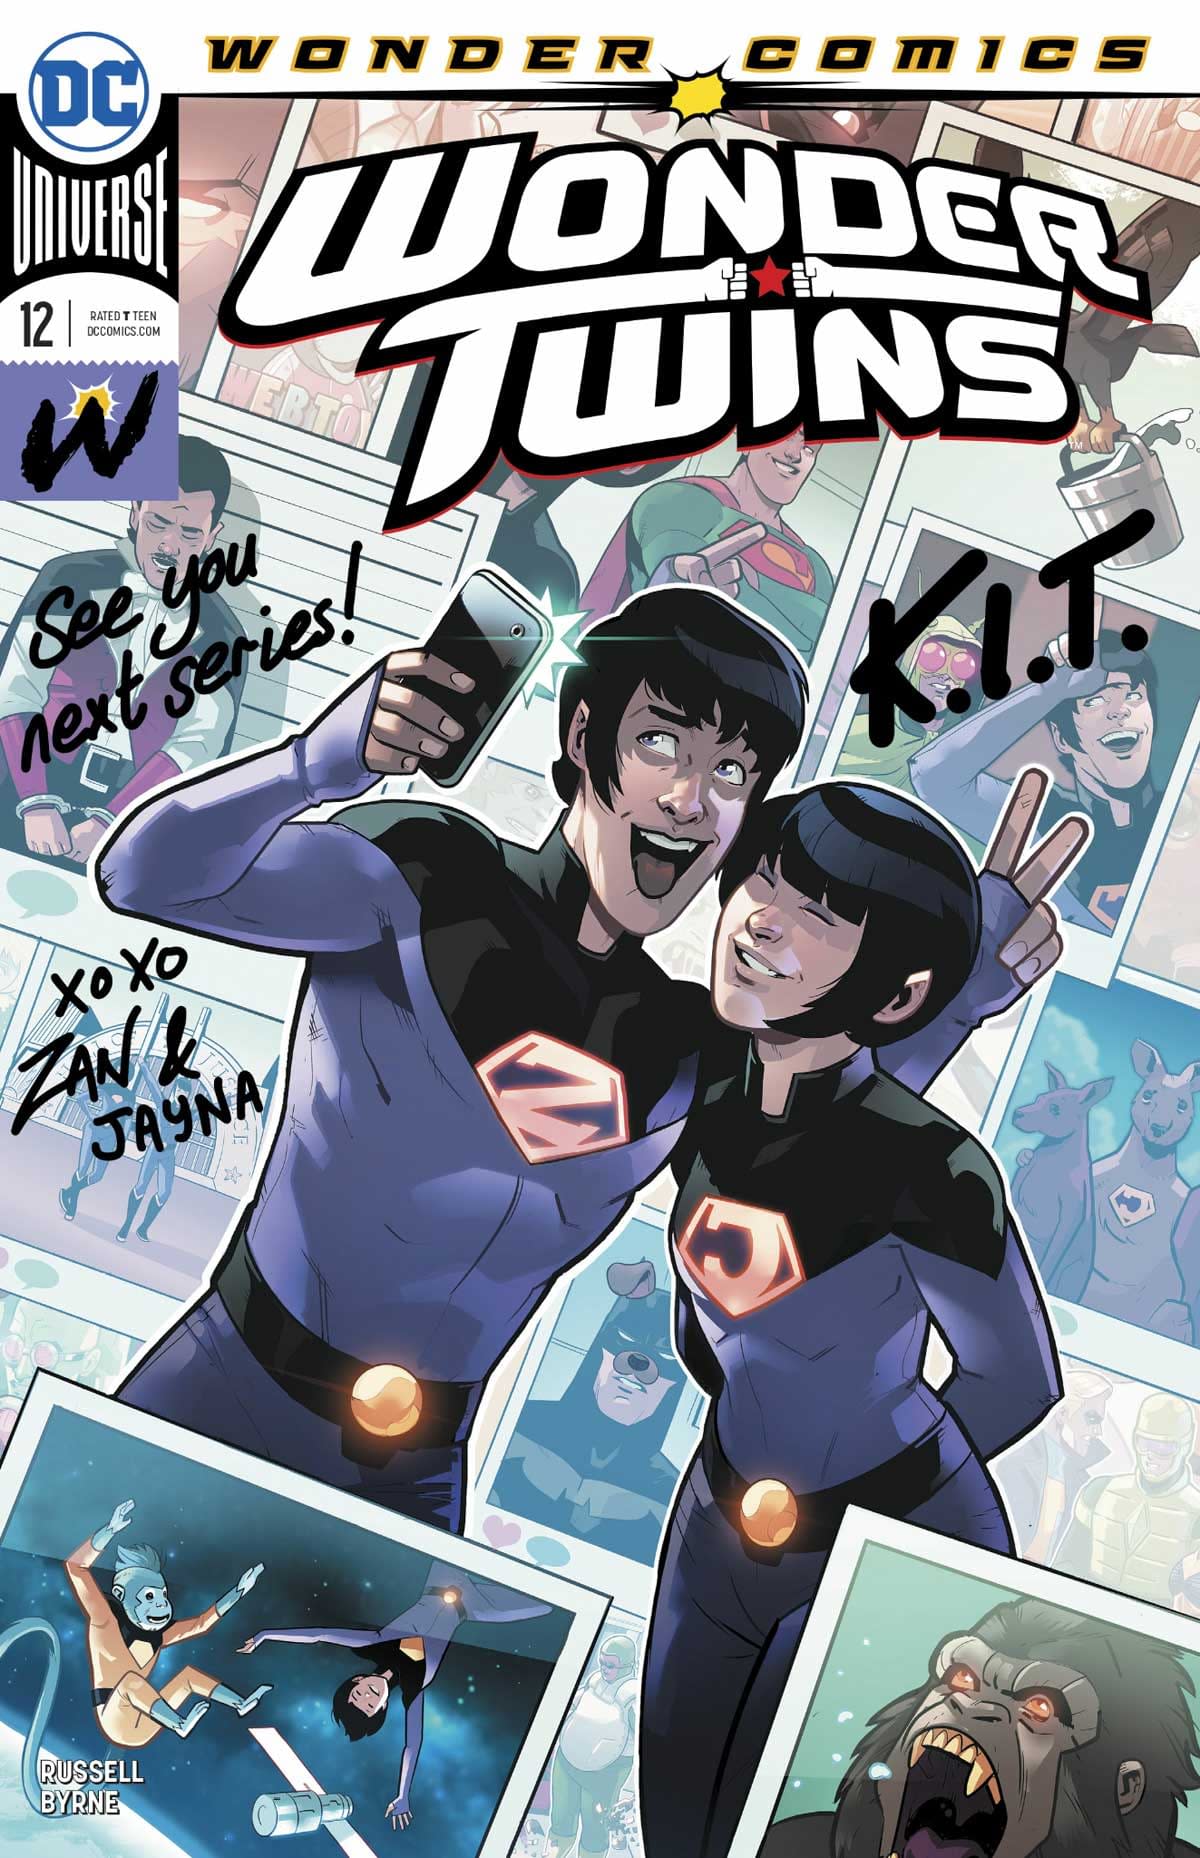 REVIEW: Wonder Twins #12 -- "The Perfect Punctuation Mark On A Breathtakingly Entertaining Series"